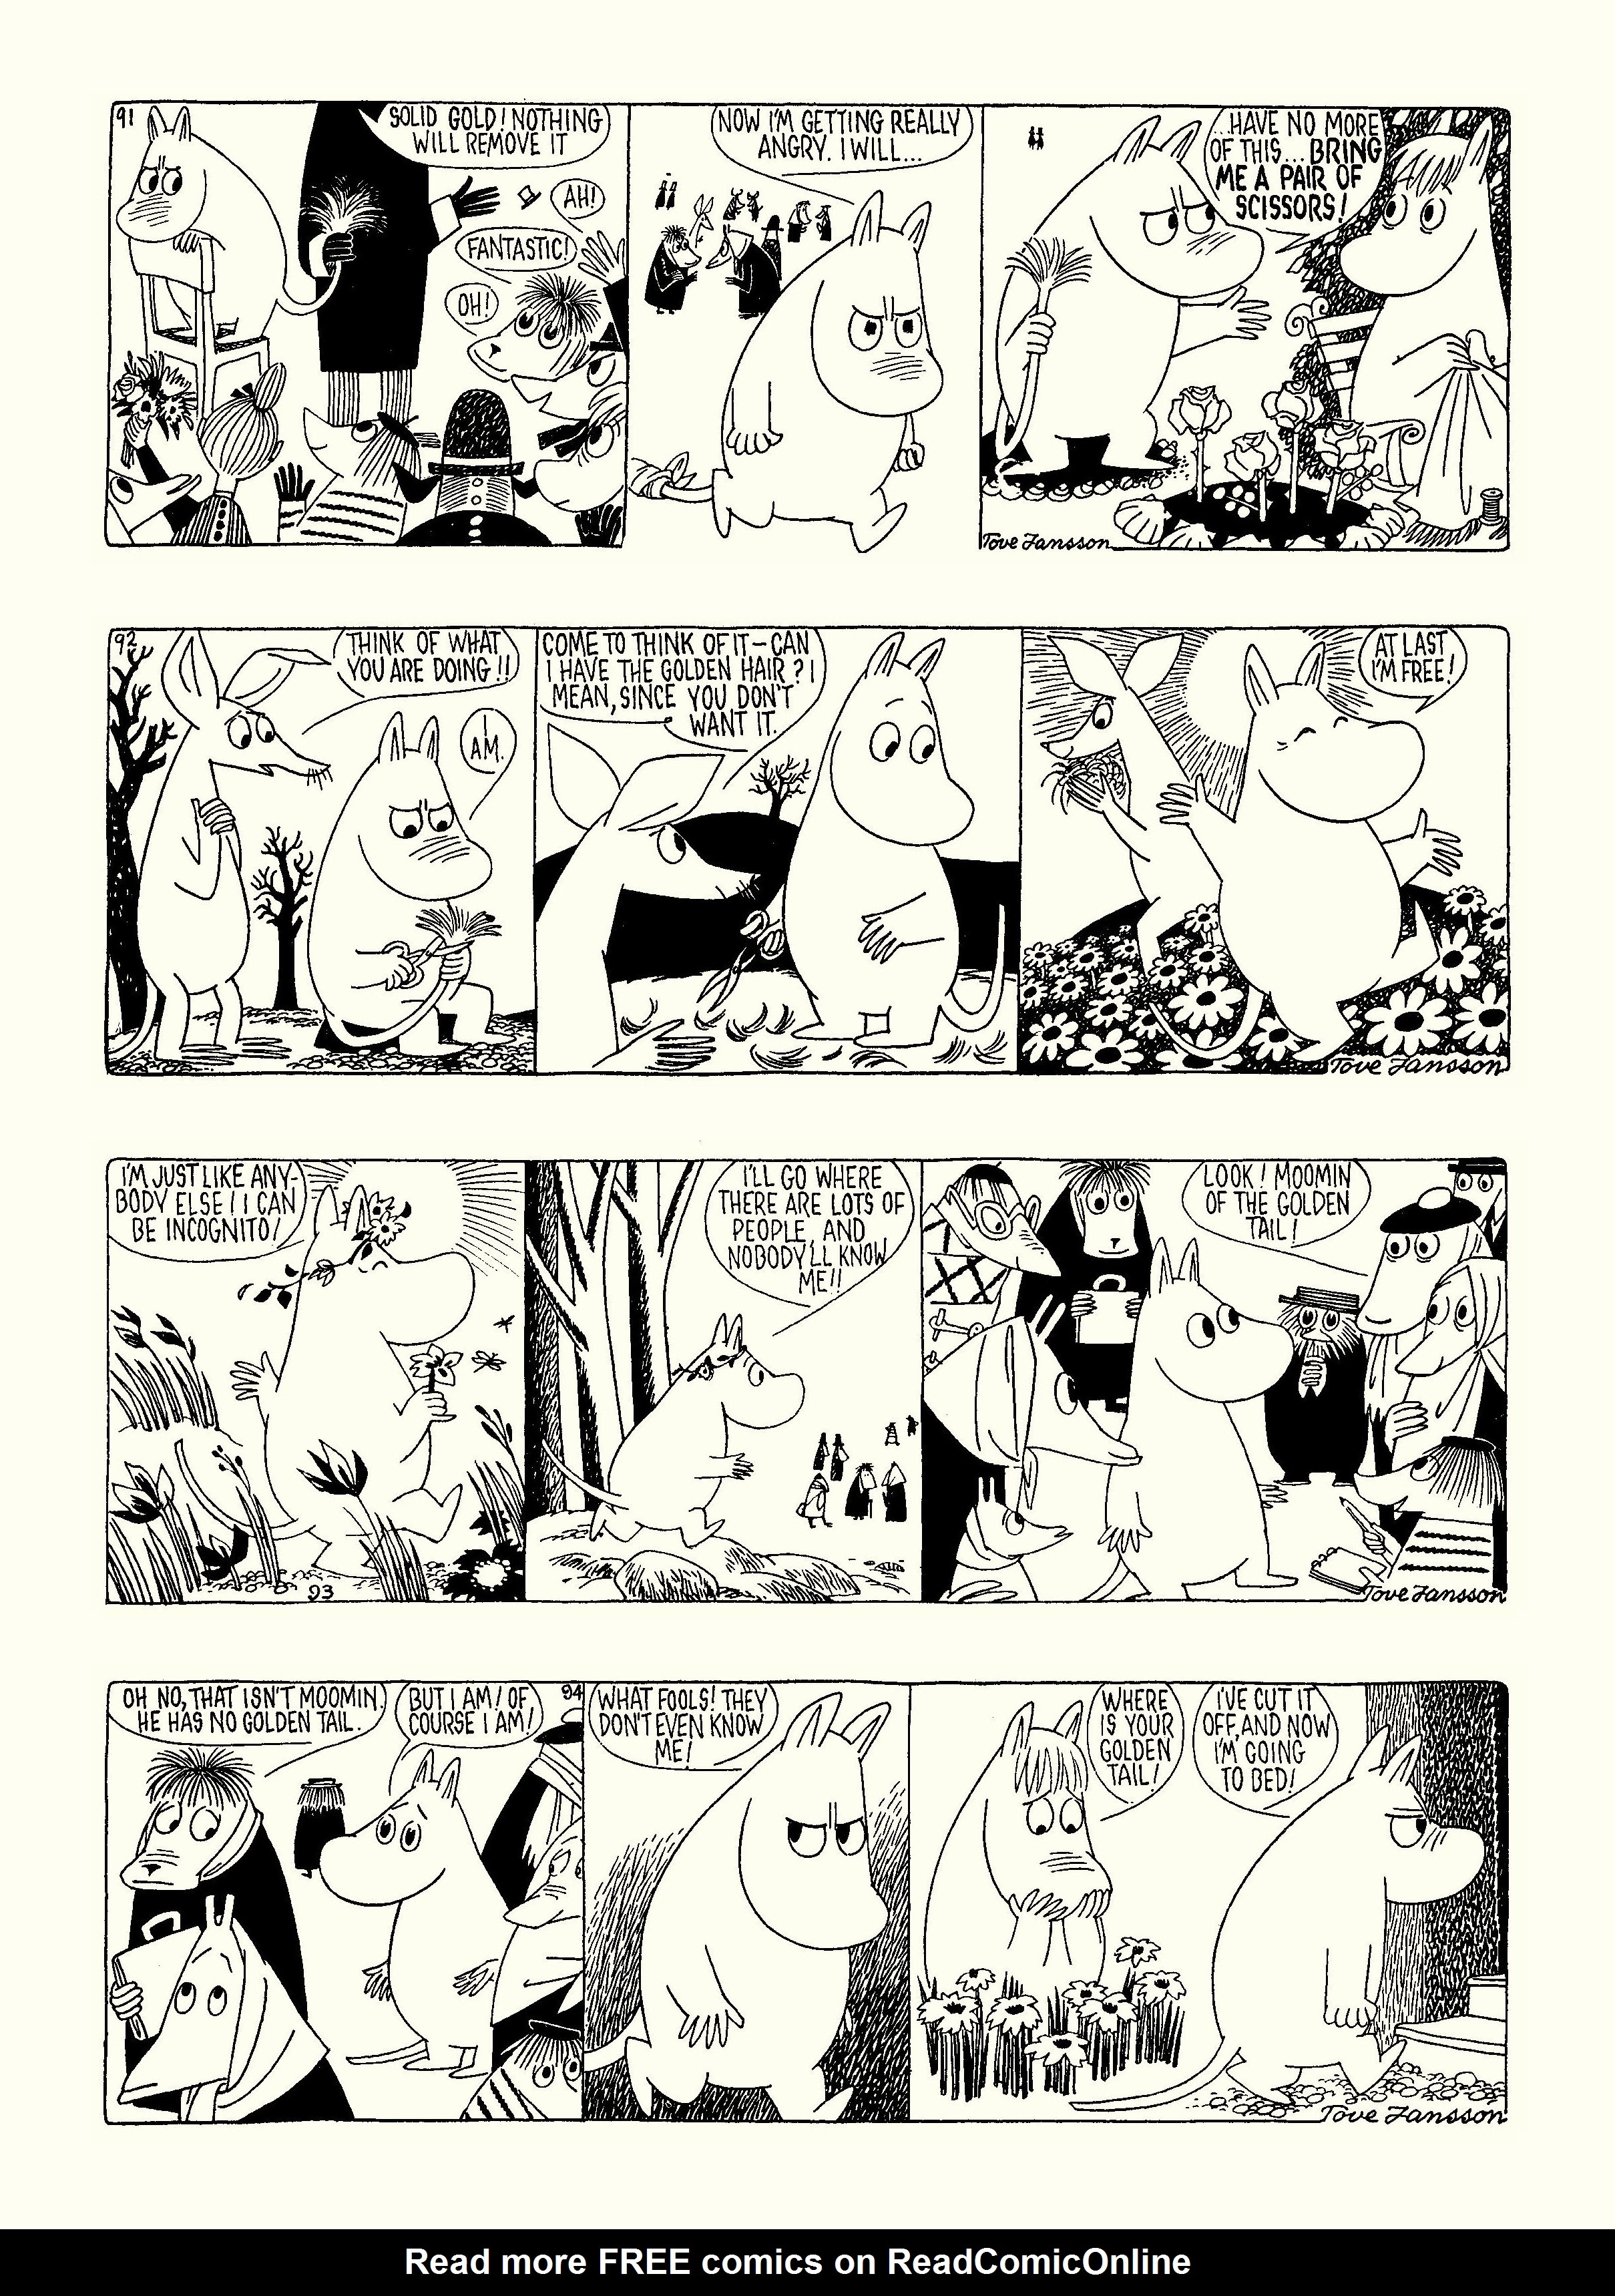 Read online Moomin: The Complete Tove Jansson Comic Strip comic -  Issue # TPB 4 - 102